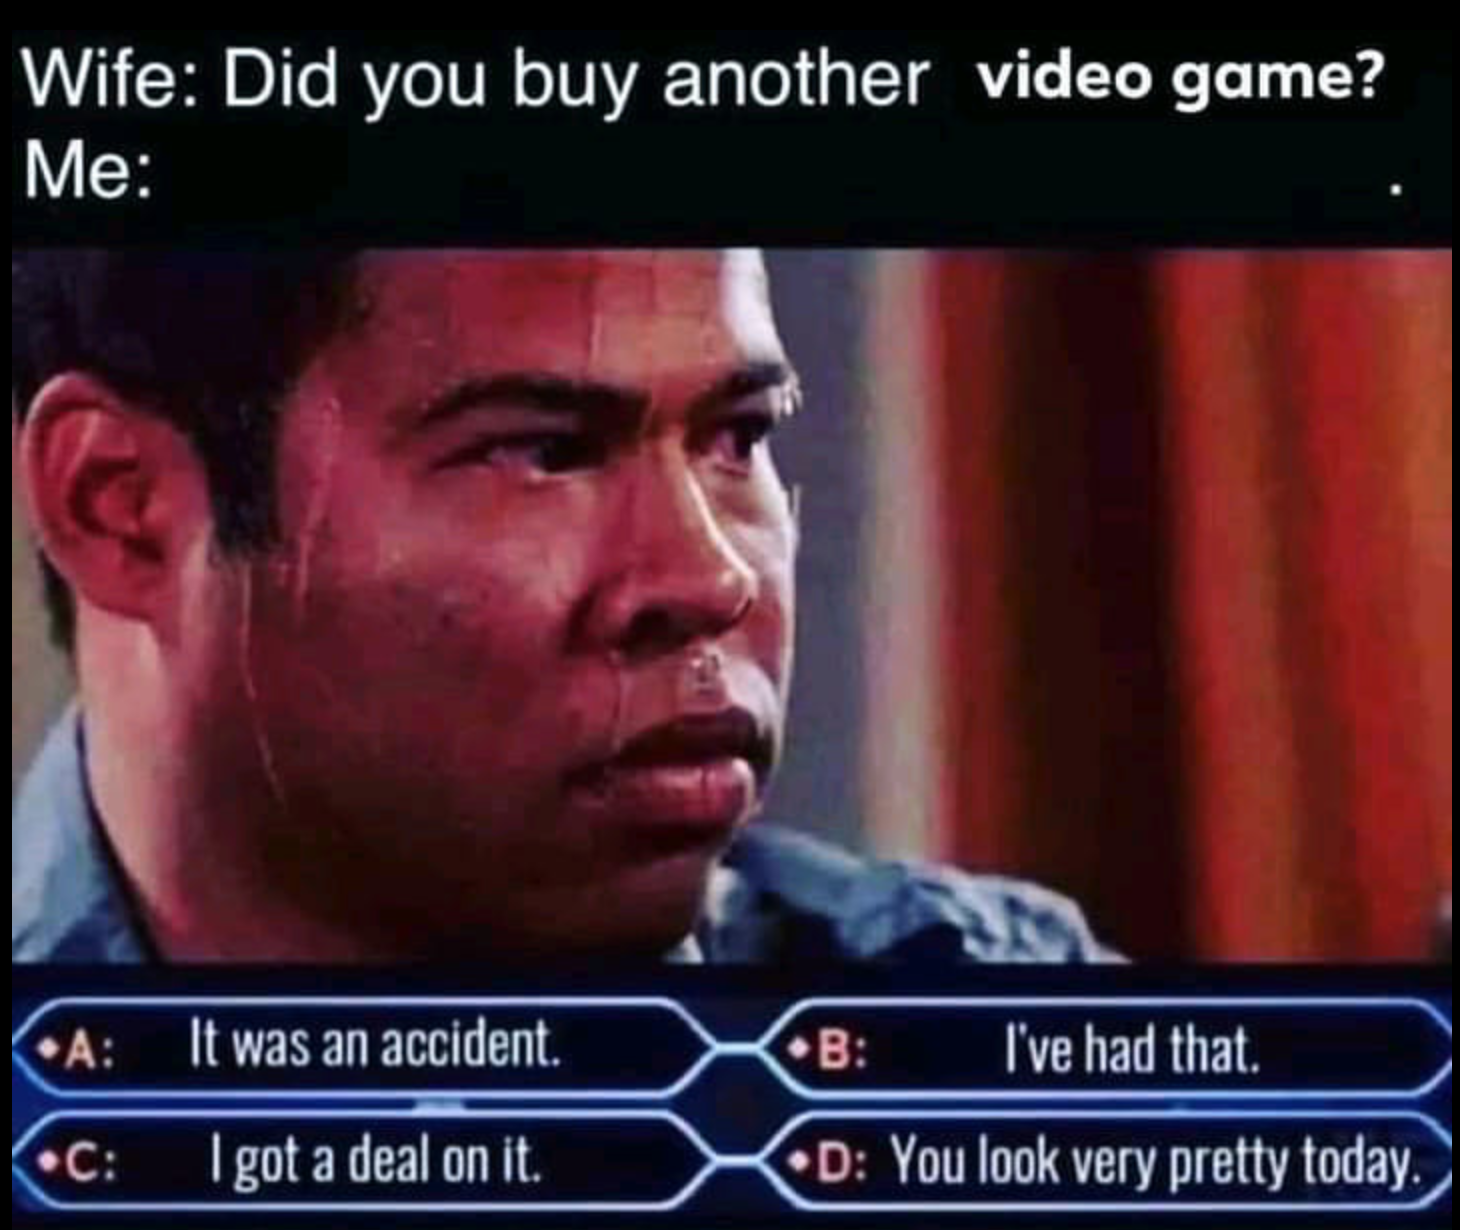 video game memes - Vapebootcamp - Wife Did you buy another video game? Me A It was an accident. B I've had that. C I got a deal on it. D You look very pretty today.